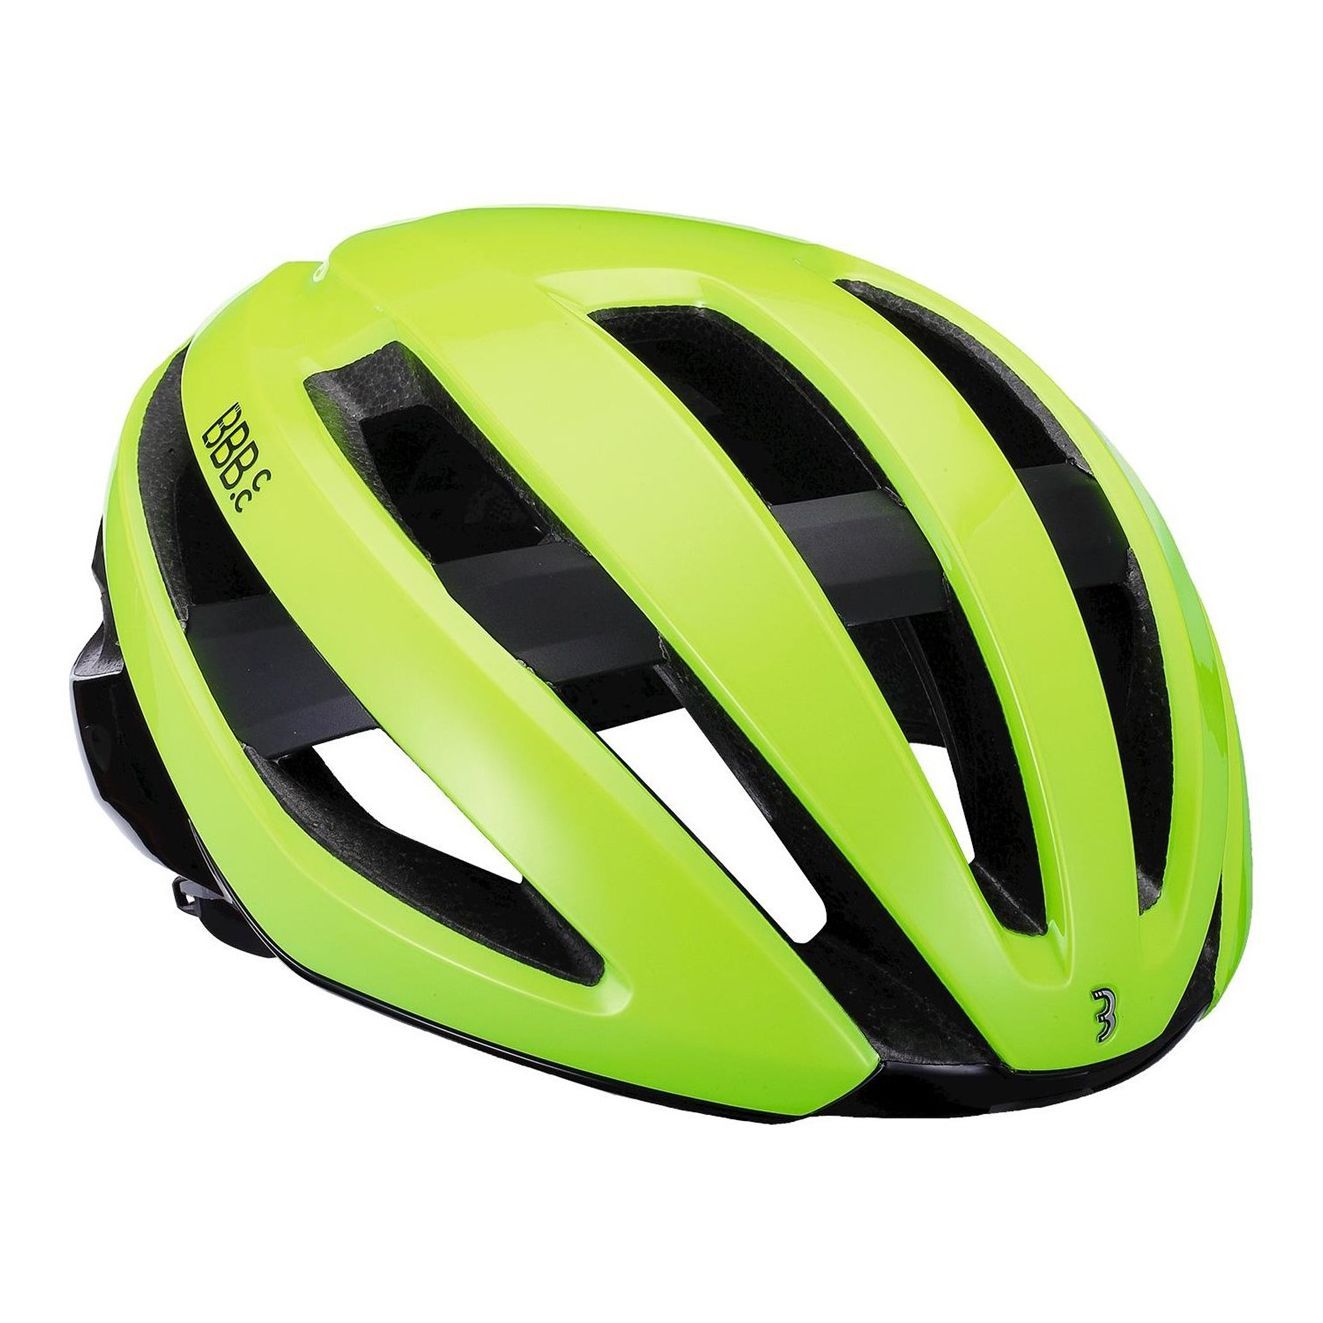 Hot New Giro helmet bicycle road live strong unisex fit 56-62cm green 